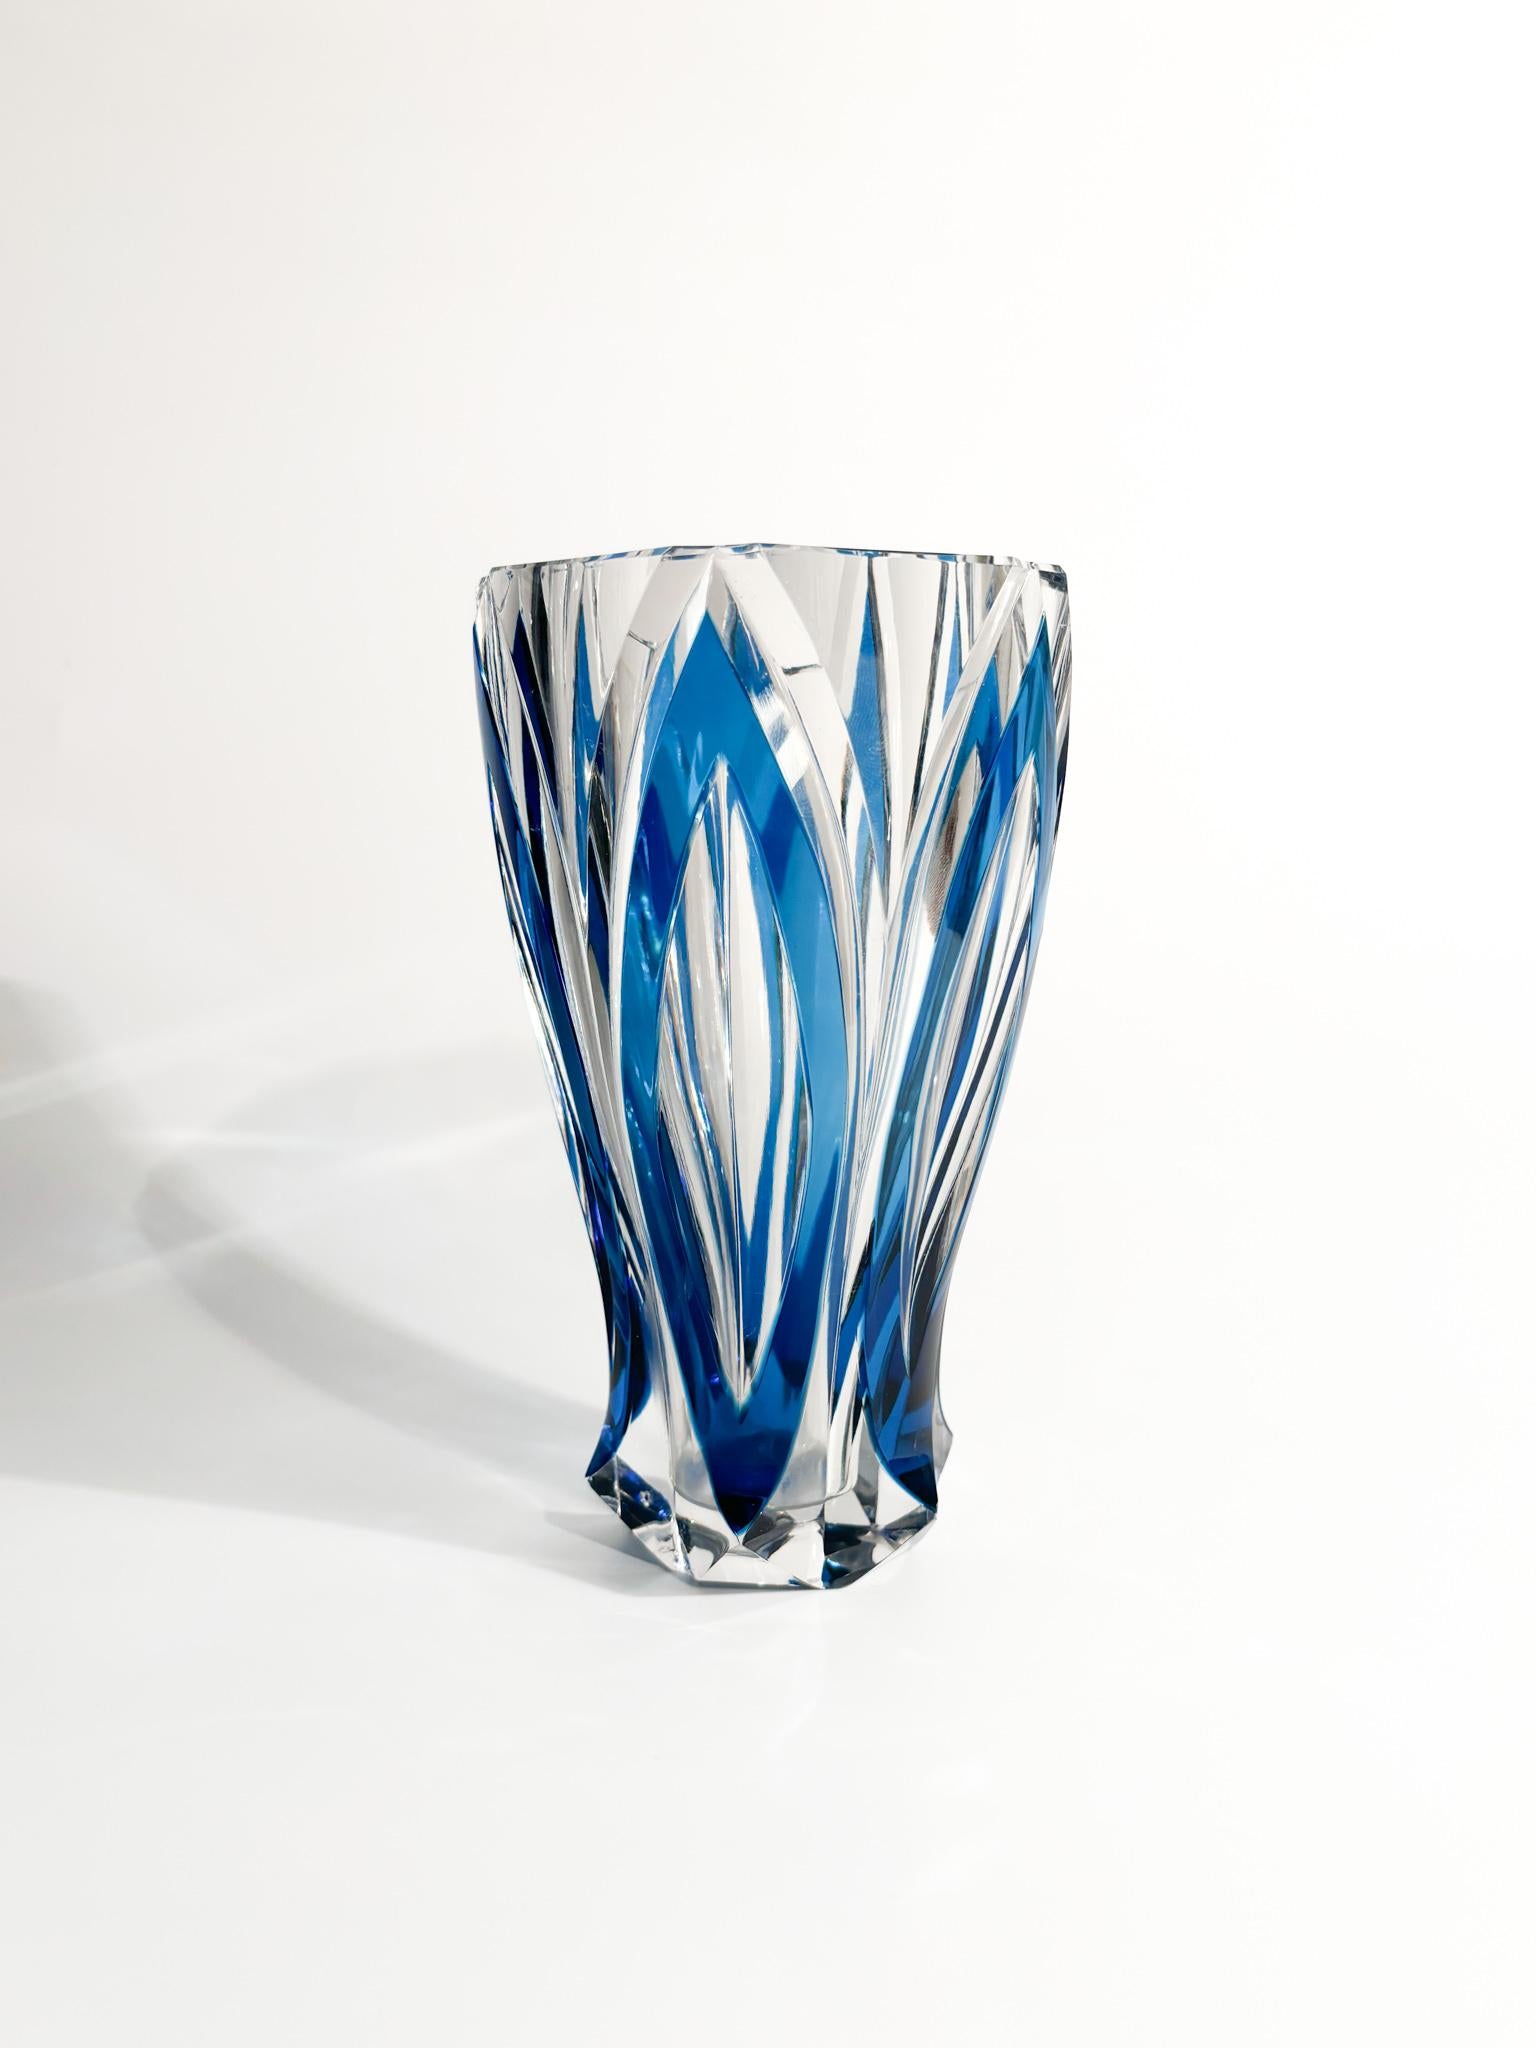 Blue French crystal vase, made by Saint-Louis in the 1940s

Ø 10,5 cm h 17,5 cm

Saint-Louis is a French crystal manufacturer known for its exquisite, high-quality crystal items. Founded in 1586, it has a rich history of producing crystal pieces for